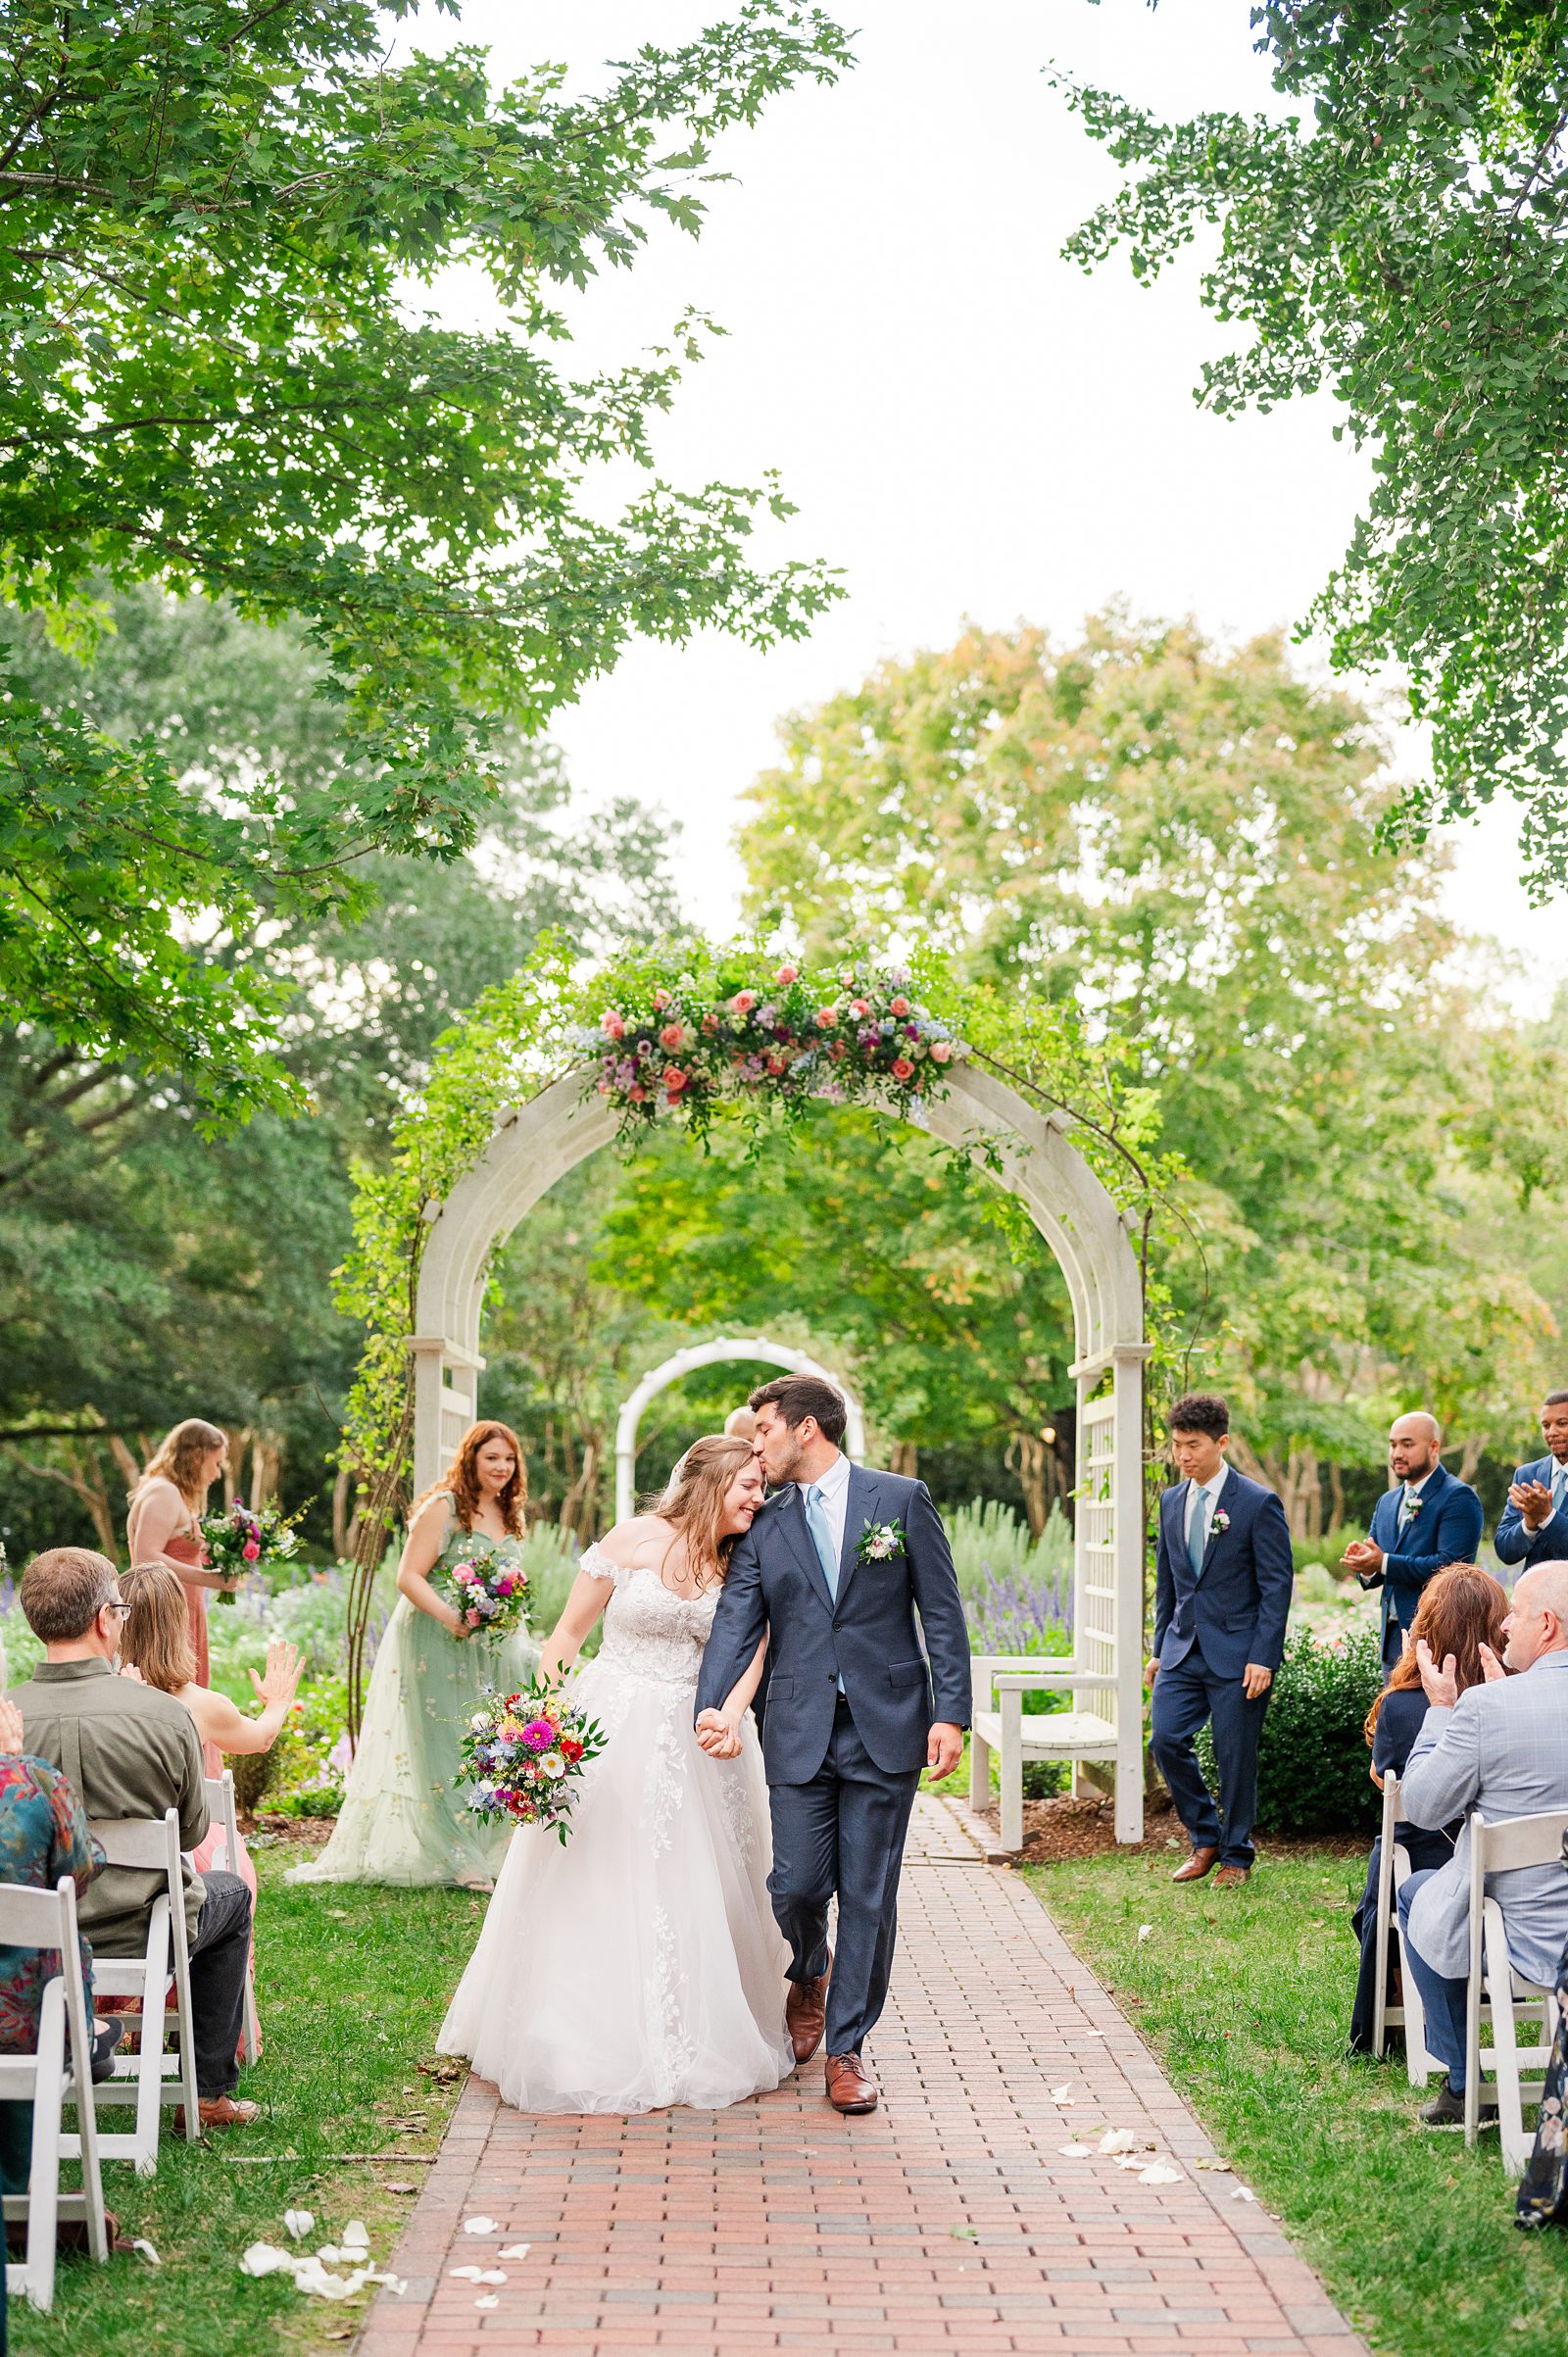 Bride and Groom Ceremony Exit at Fall Lewis Ginter Wedding Ceremony